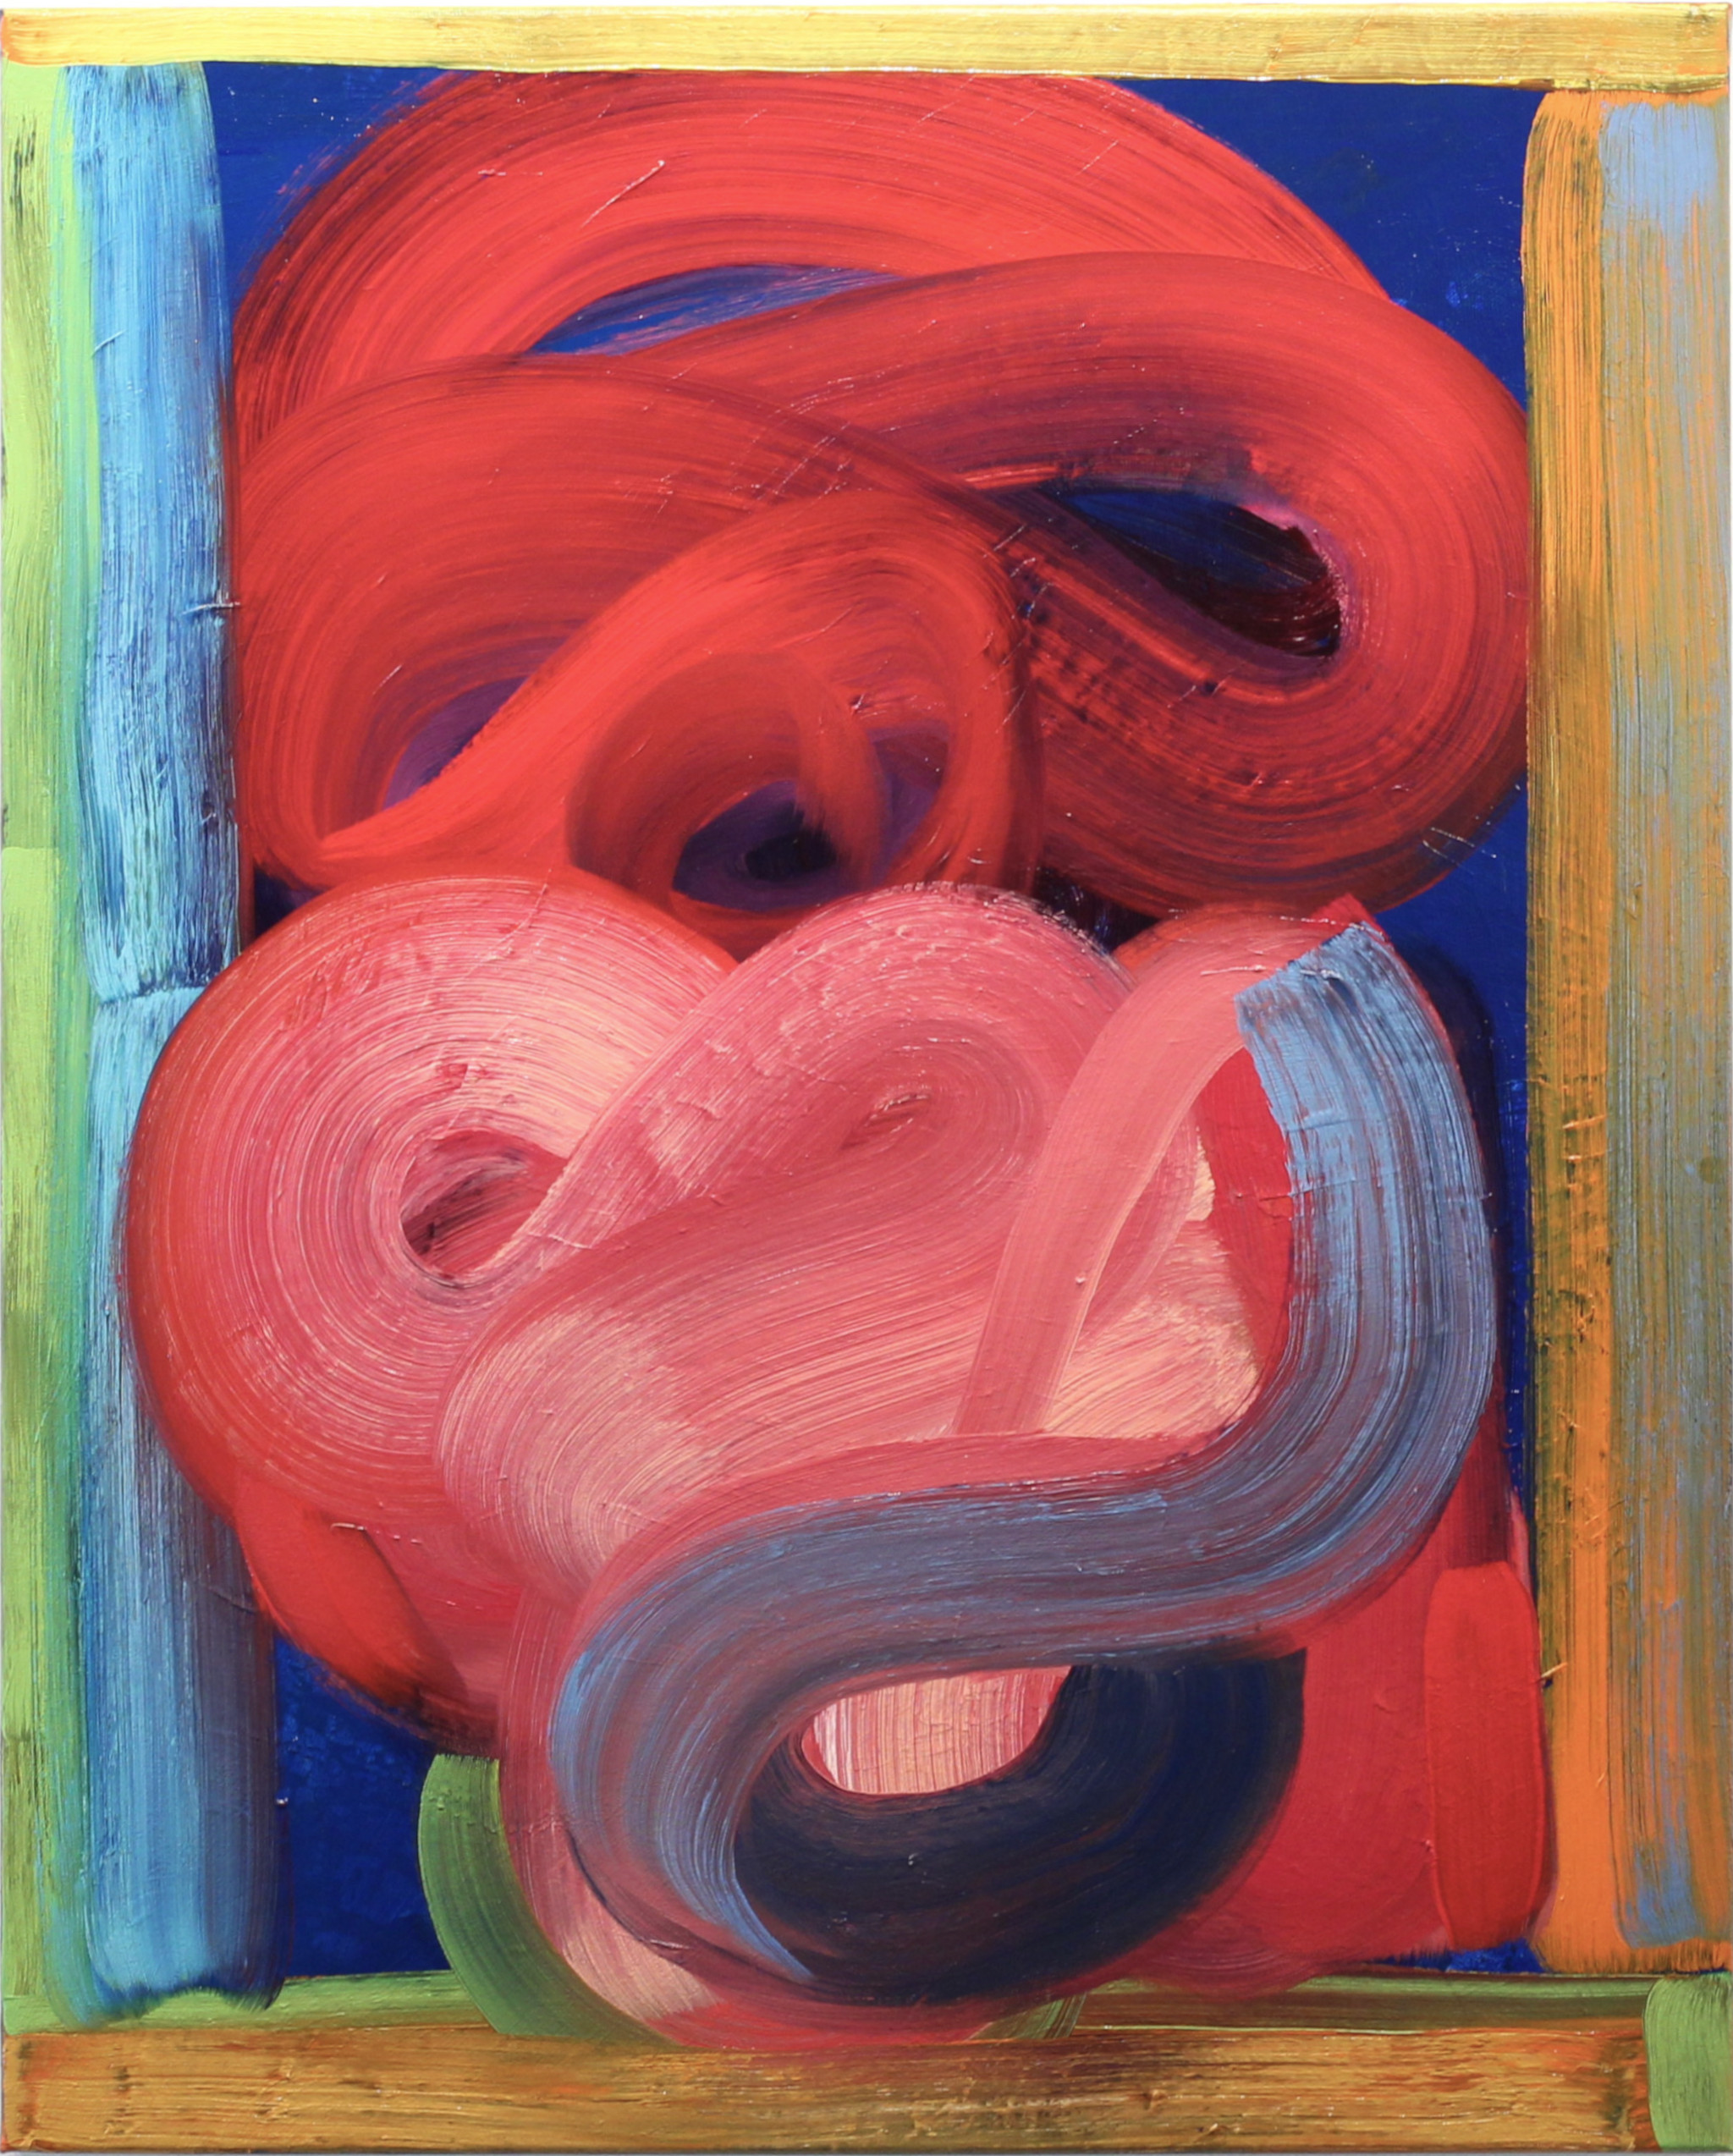 Matt Frock, 'Portrait Of The Heart' is an abstract oil painting evocative of a heart shape with broad, carefree brush strokes. 